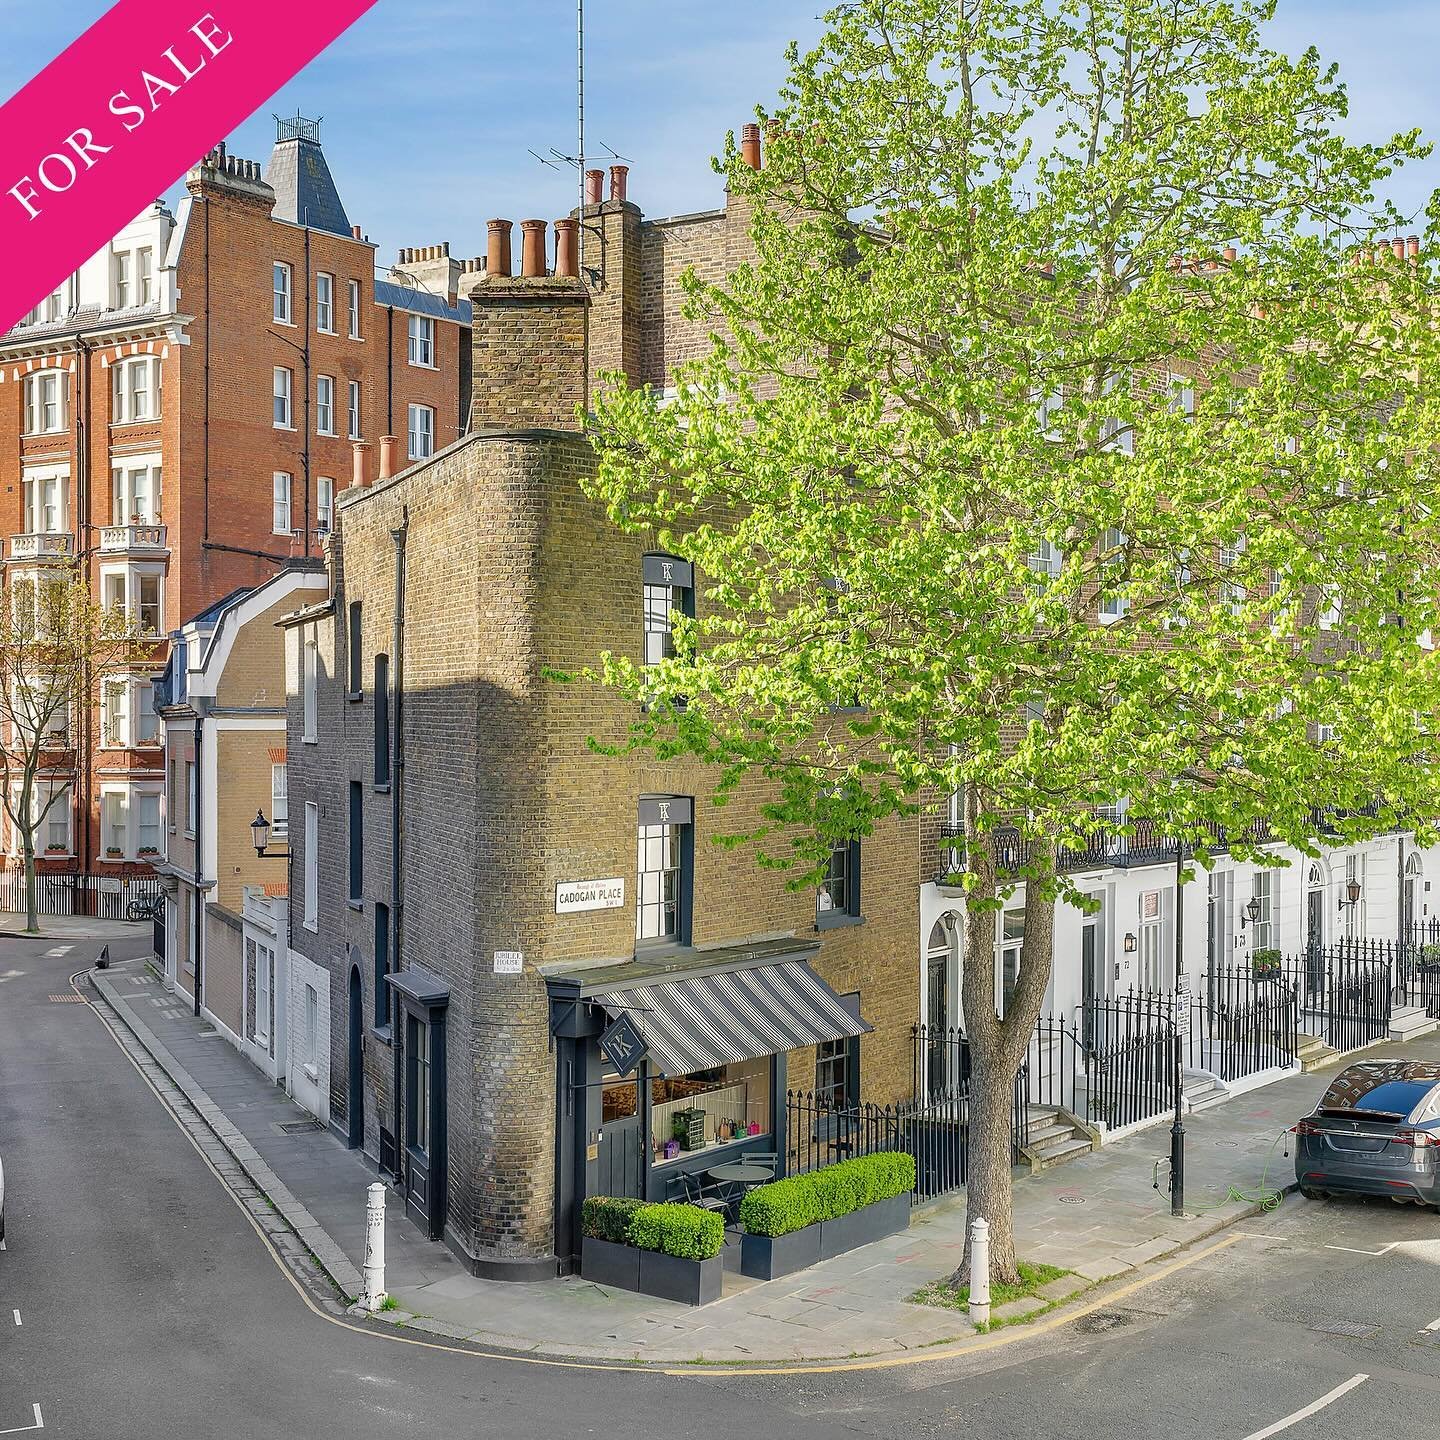 For Sale | &pound;2,950,000 | Cadogan Lane, SW1X

Cadogan Lane is a super quiet street running behind the fabulous white stucco houses of Cadogan Place, and marks the boundary of the great Cadogan Estate. We have just launched this charming freehold 